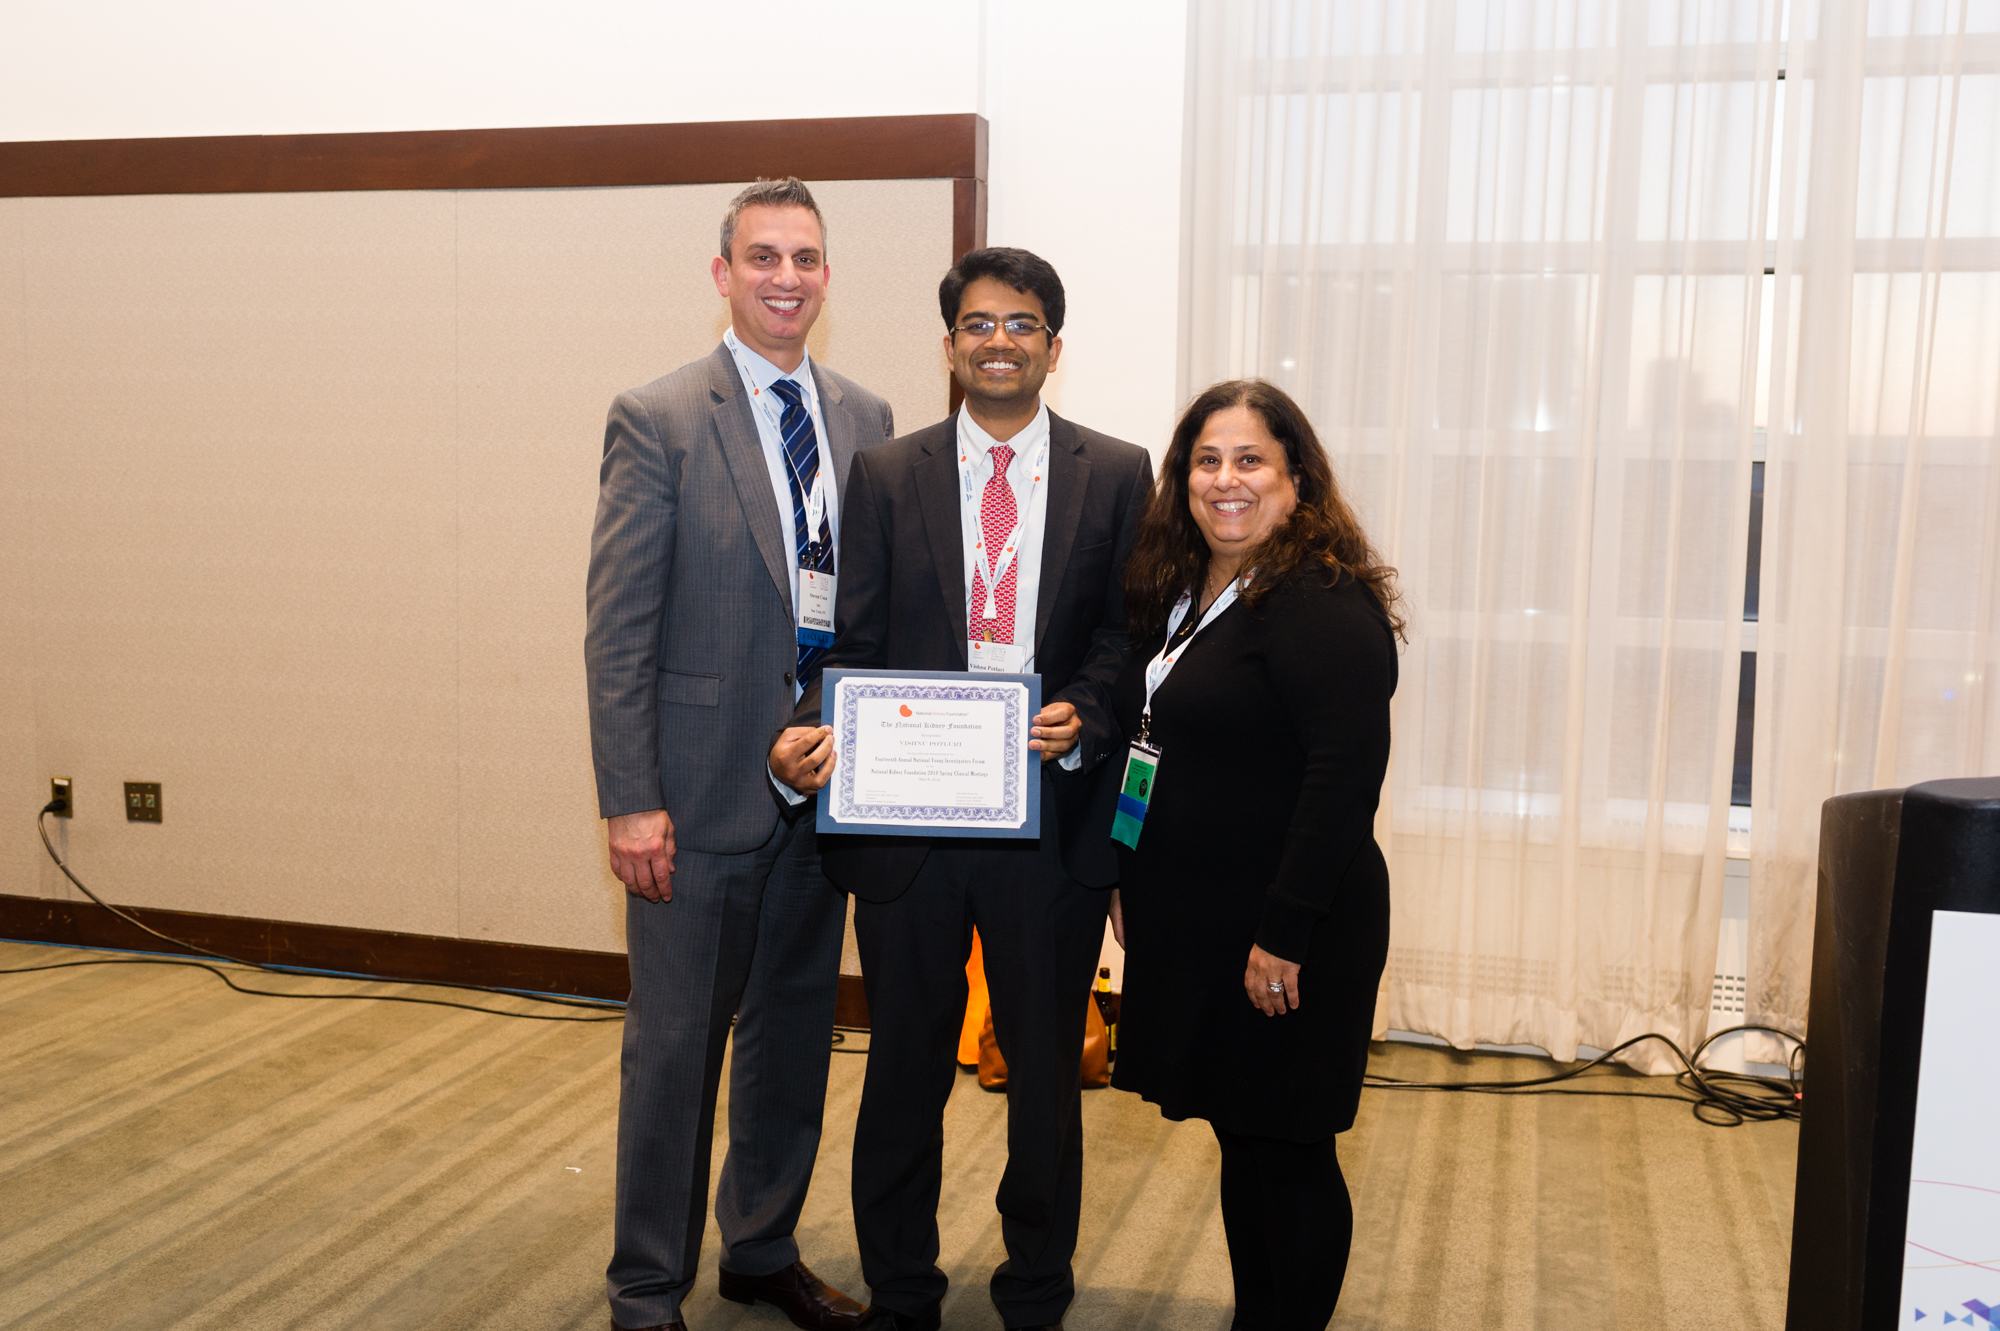 Dr Vishnu Potluri flanked by two representatives of the National Kidney Foundation. He is receiving the Young Investigators Award